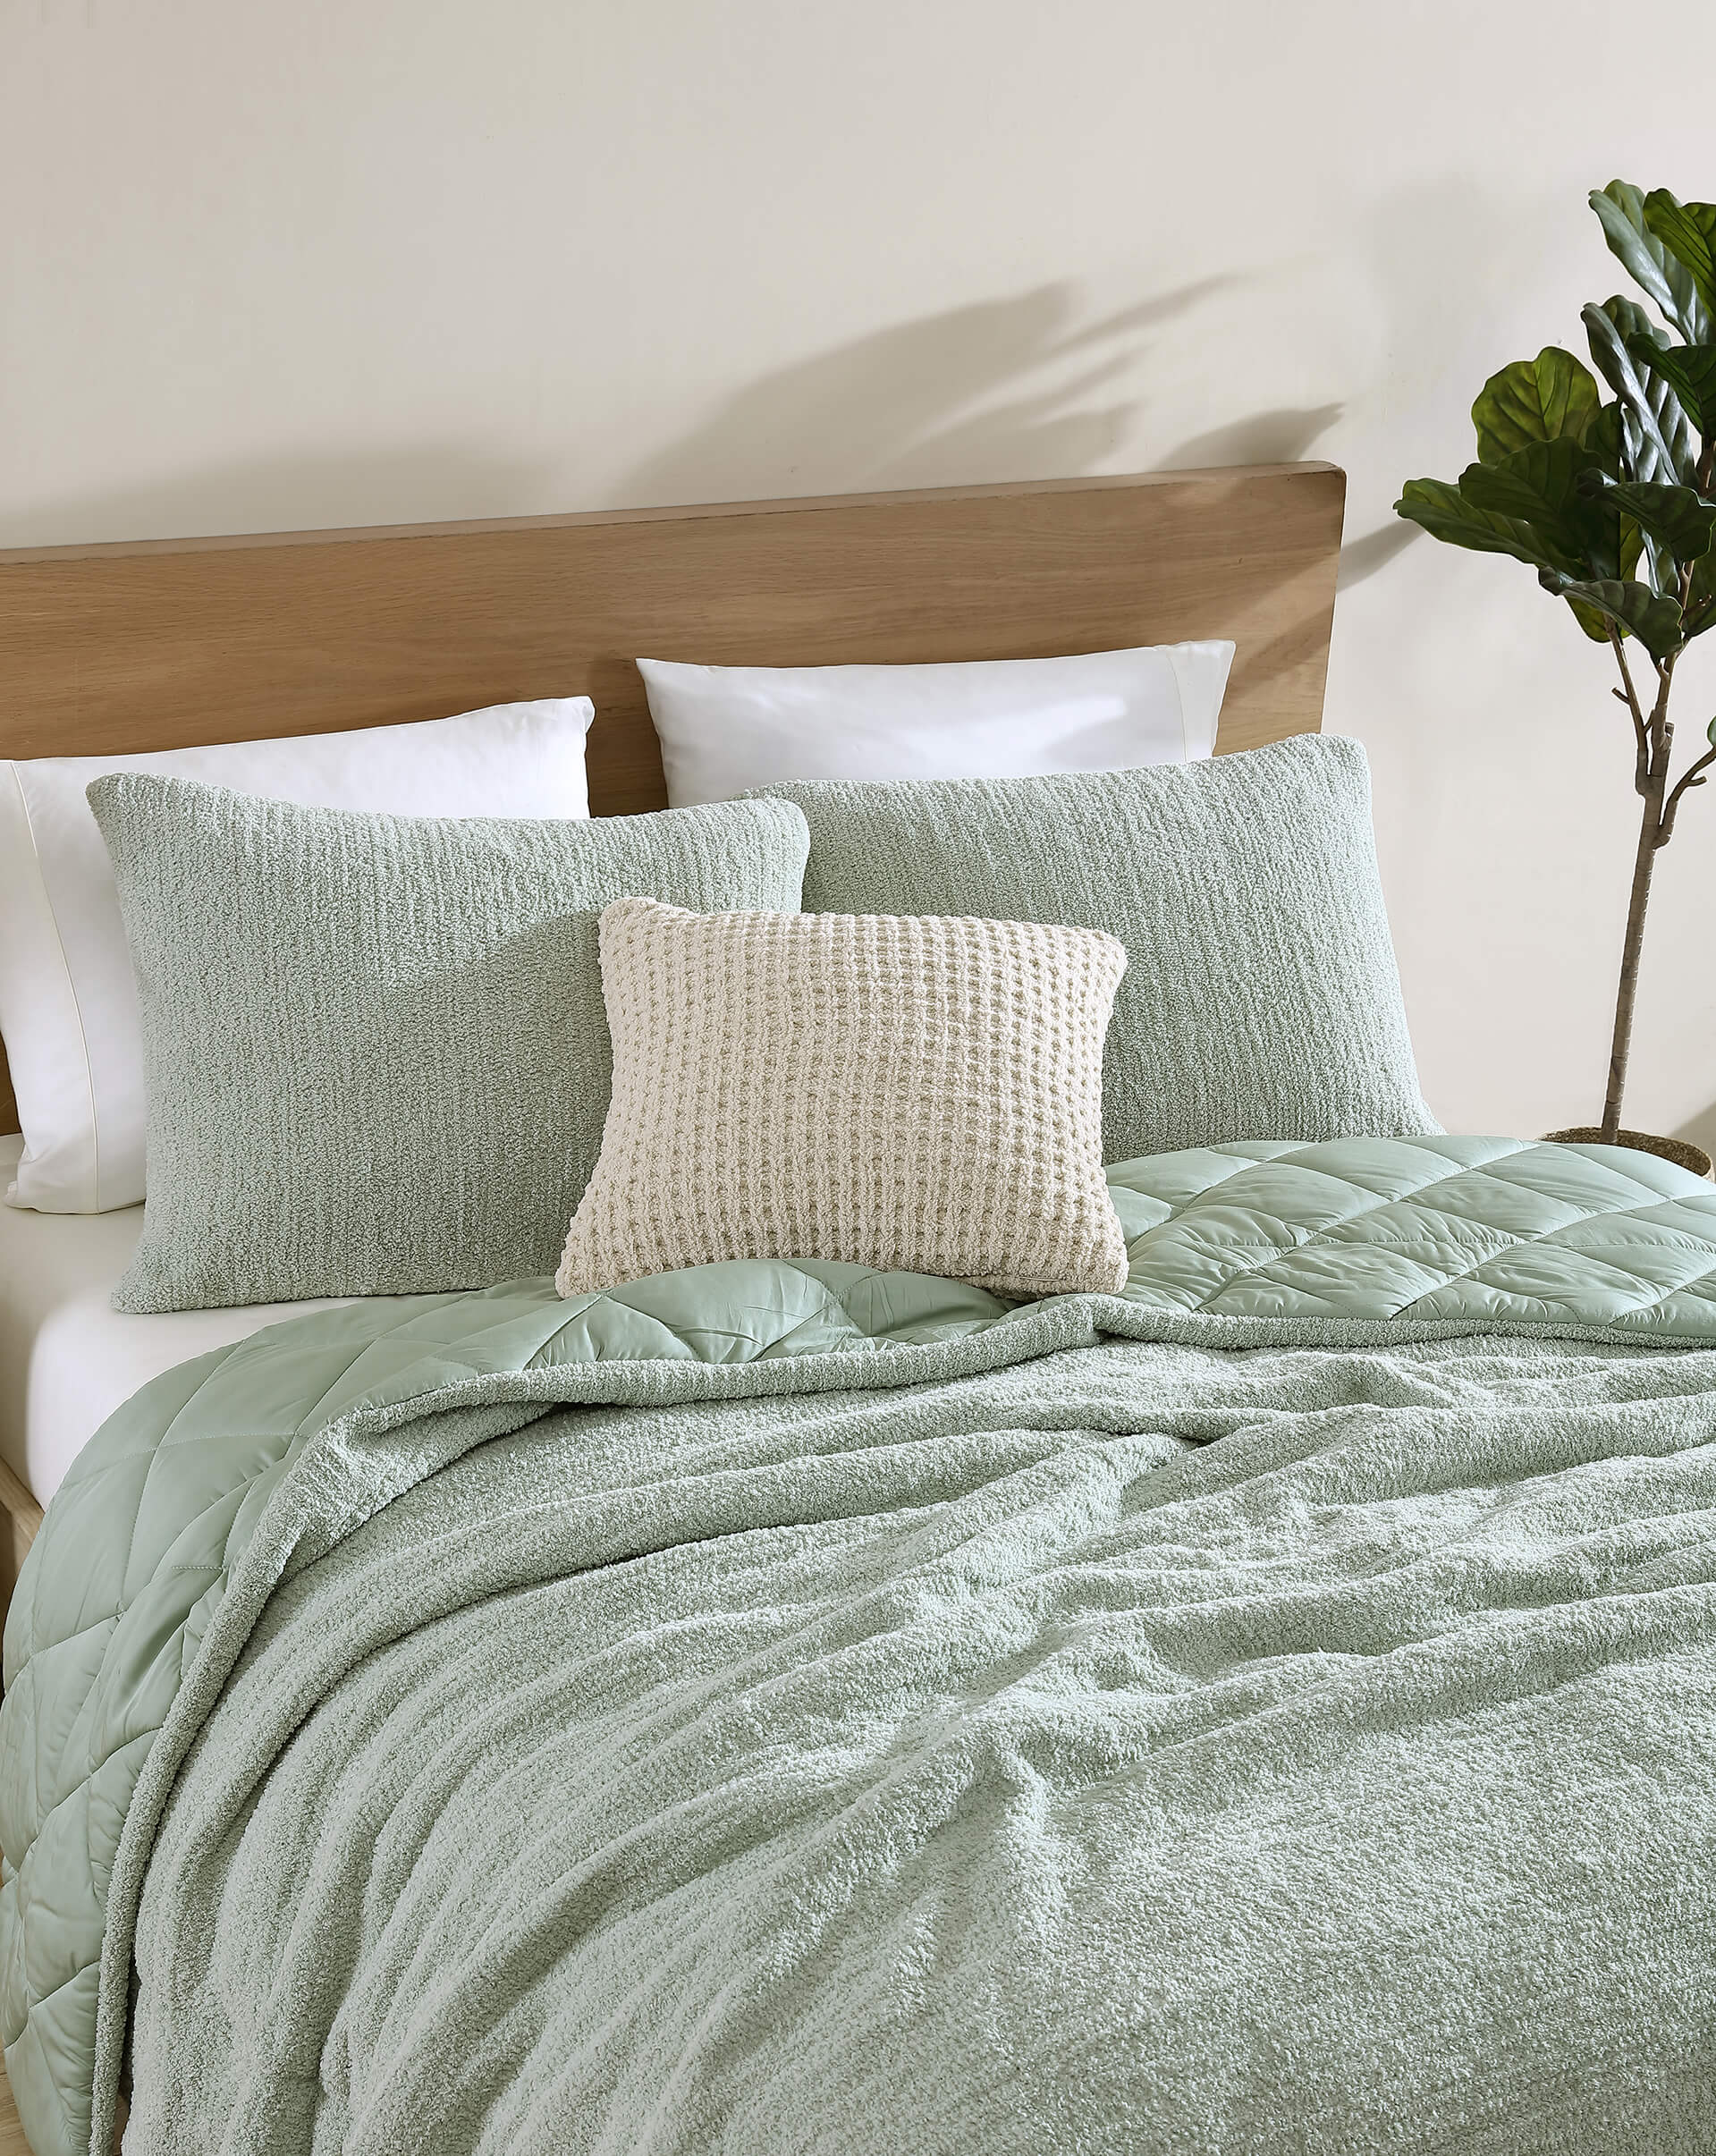 Pillowcase & Sham Guide: How to Choose the Best Options for Your